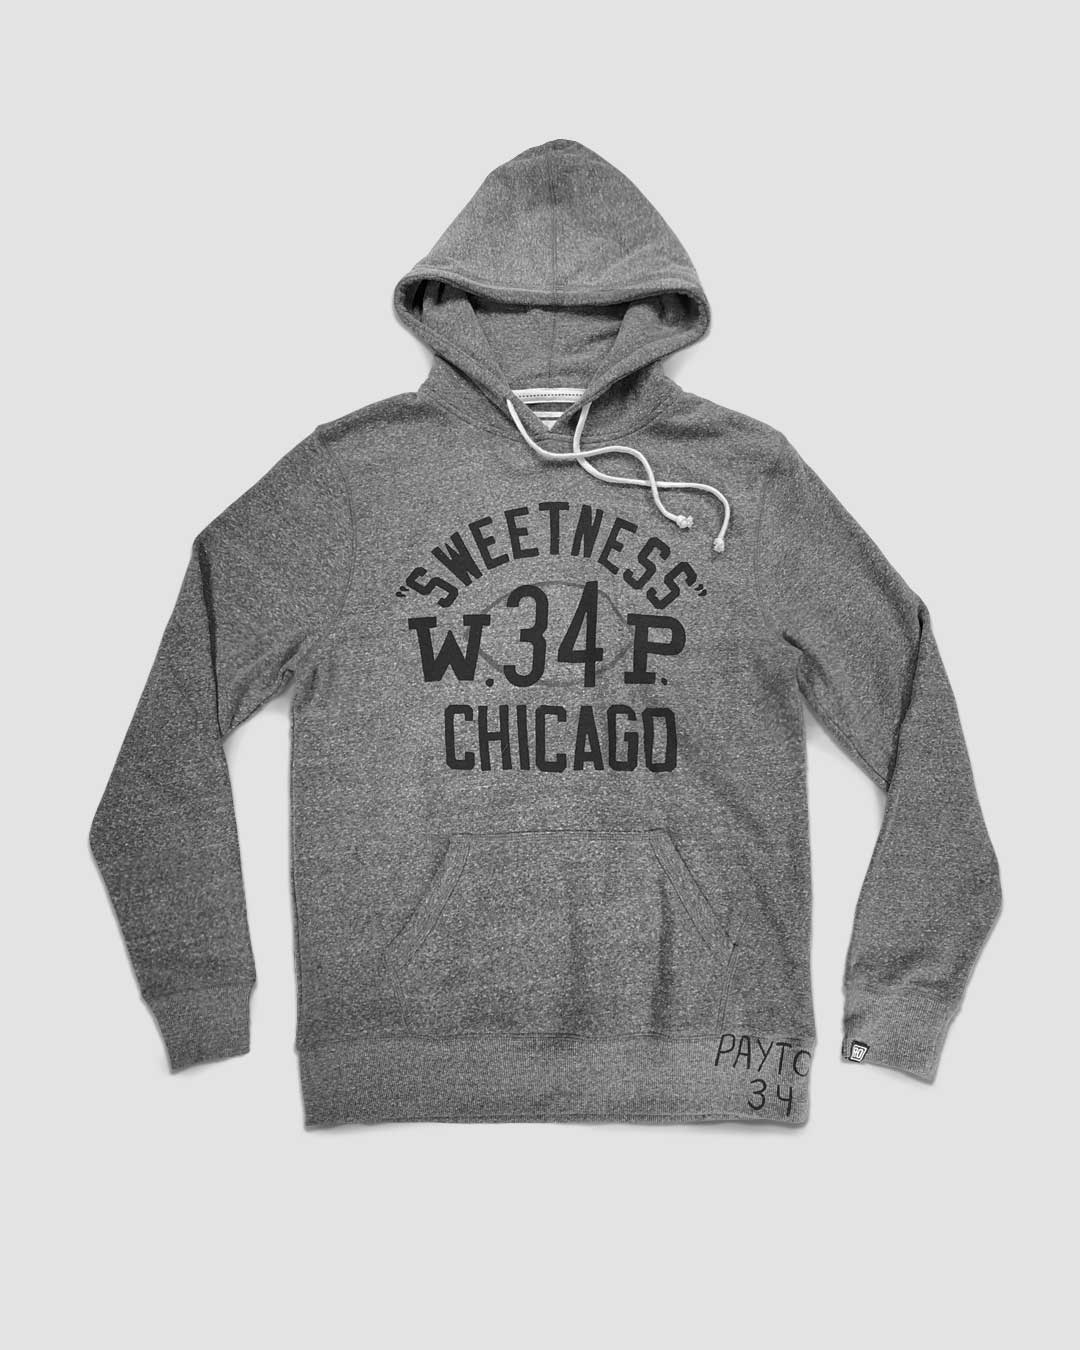 Walter Payton Sweetness Pullover Hoody - Roots of Inc dba Roots of Fight